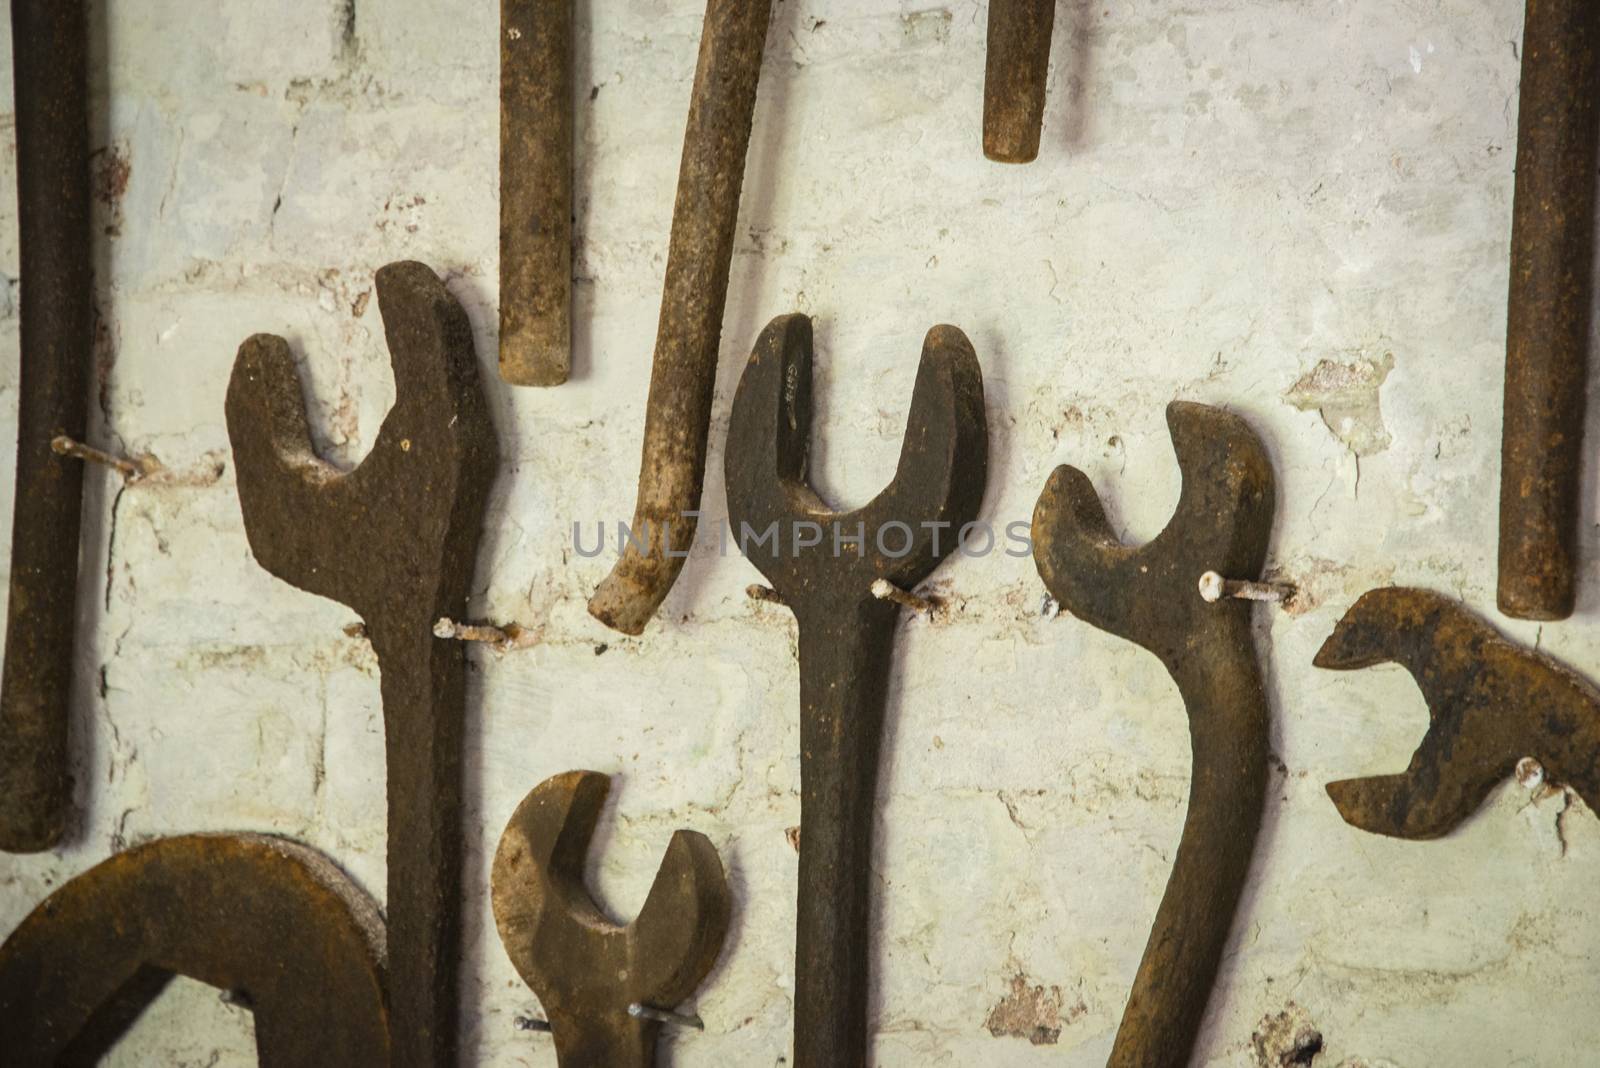 Antique spannners attached to a wall in a museum